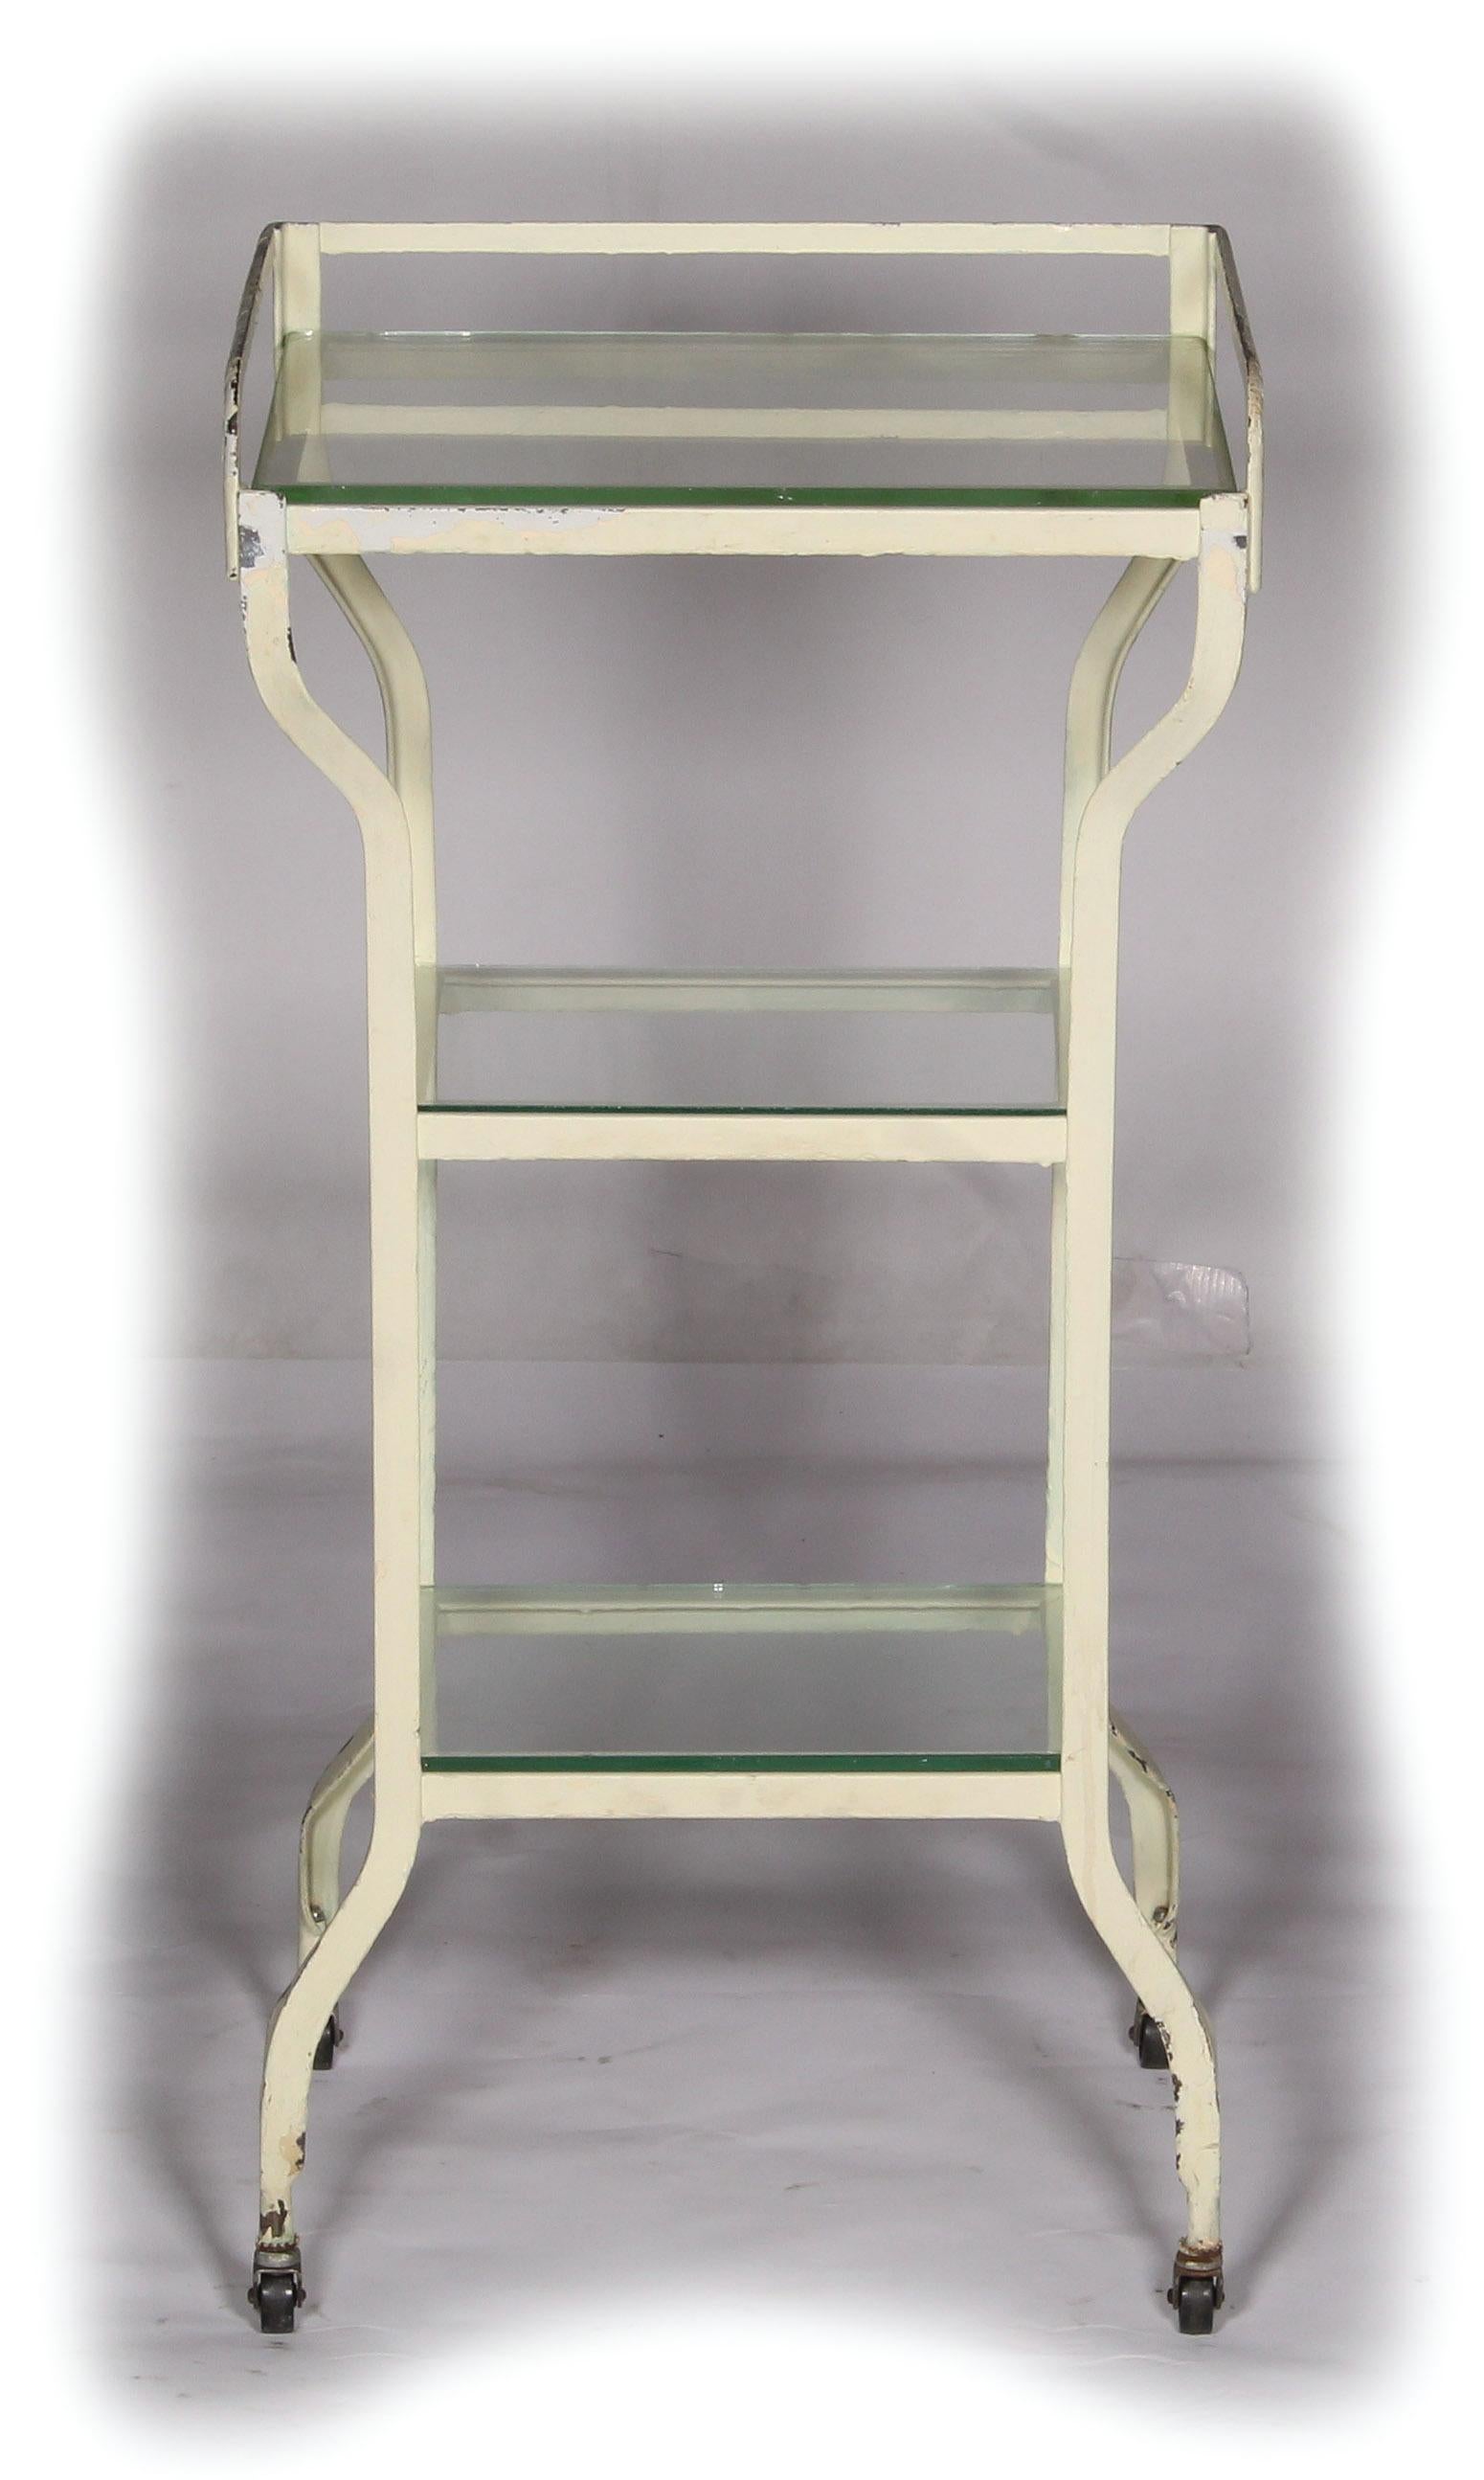 Vintage 3-tier white medical stand on wheels. Also available, matching wider stand.